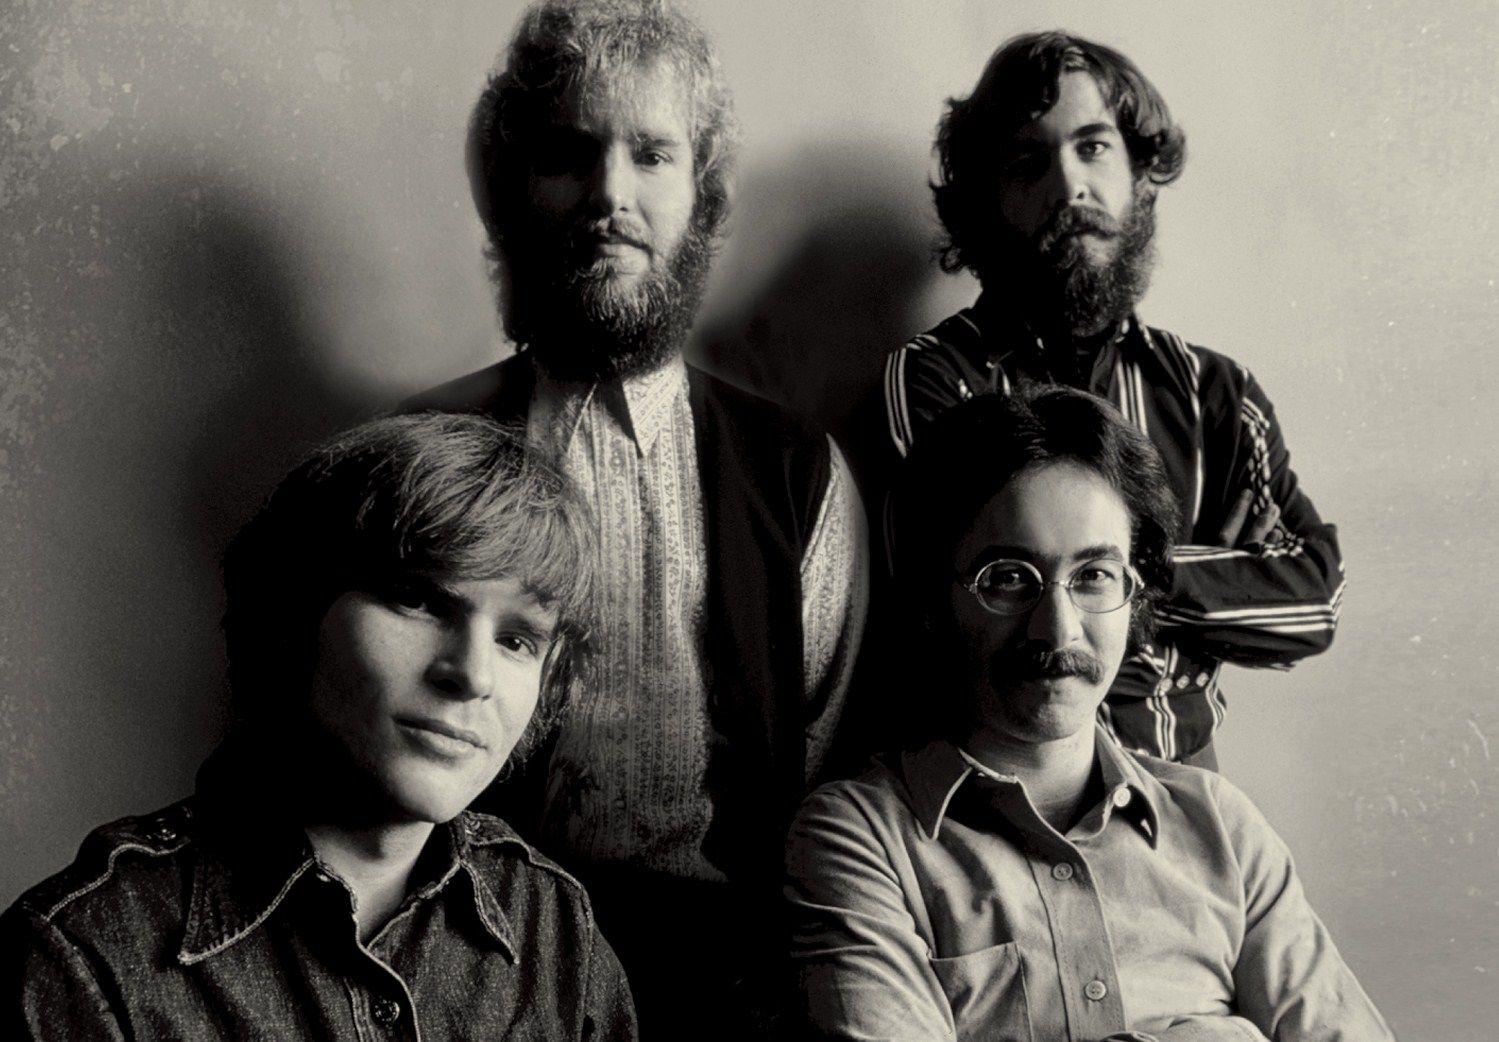 Creedence Clearwater Revival image creedence clearwater revival